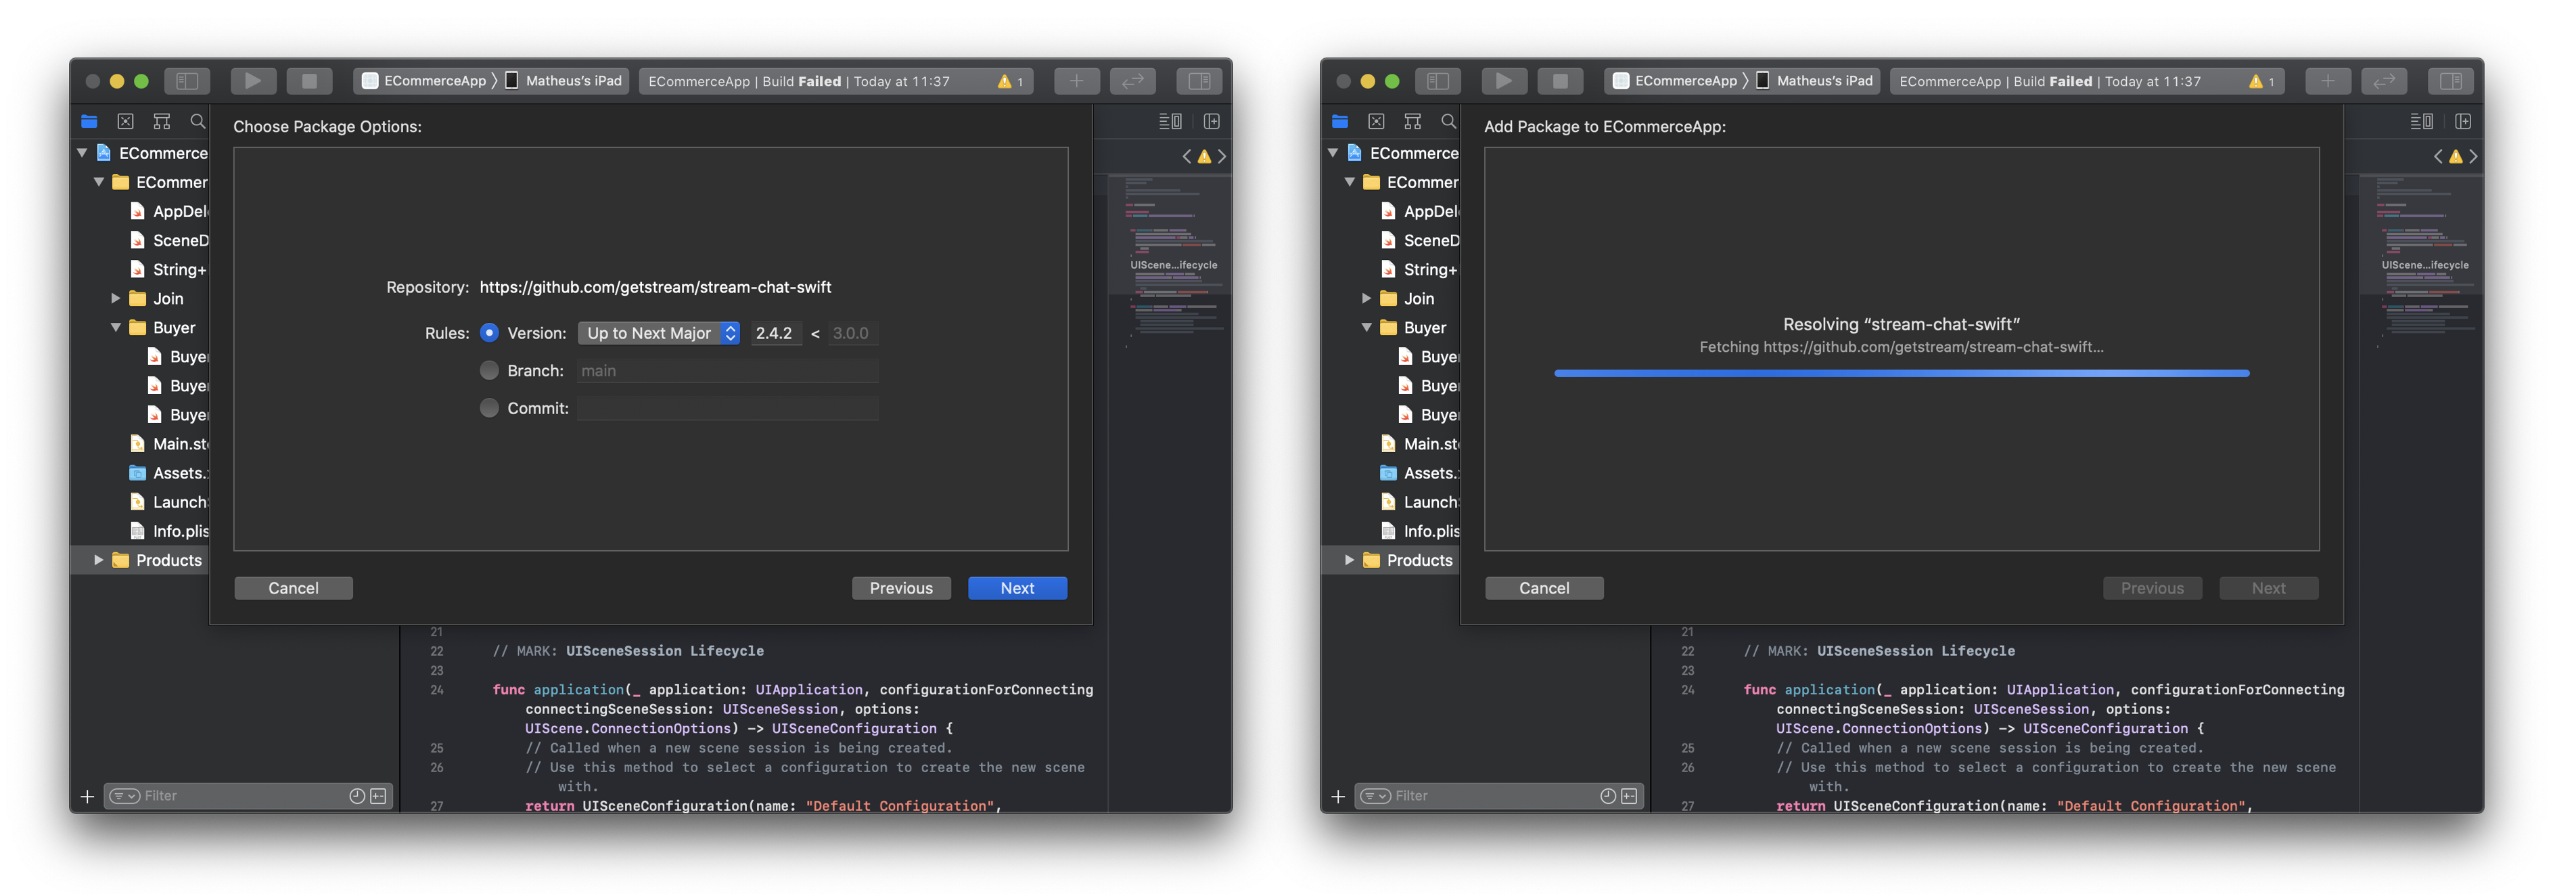 Screenshot shows an Xcode screen selecting a dependency version and an Xcode screen downloading that dependency